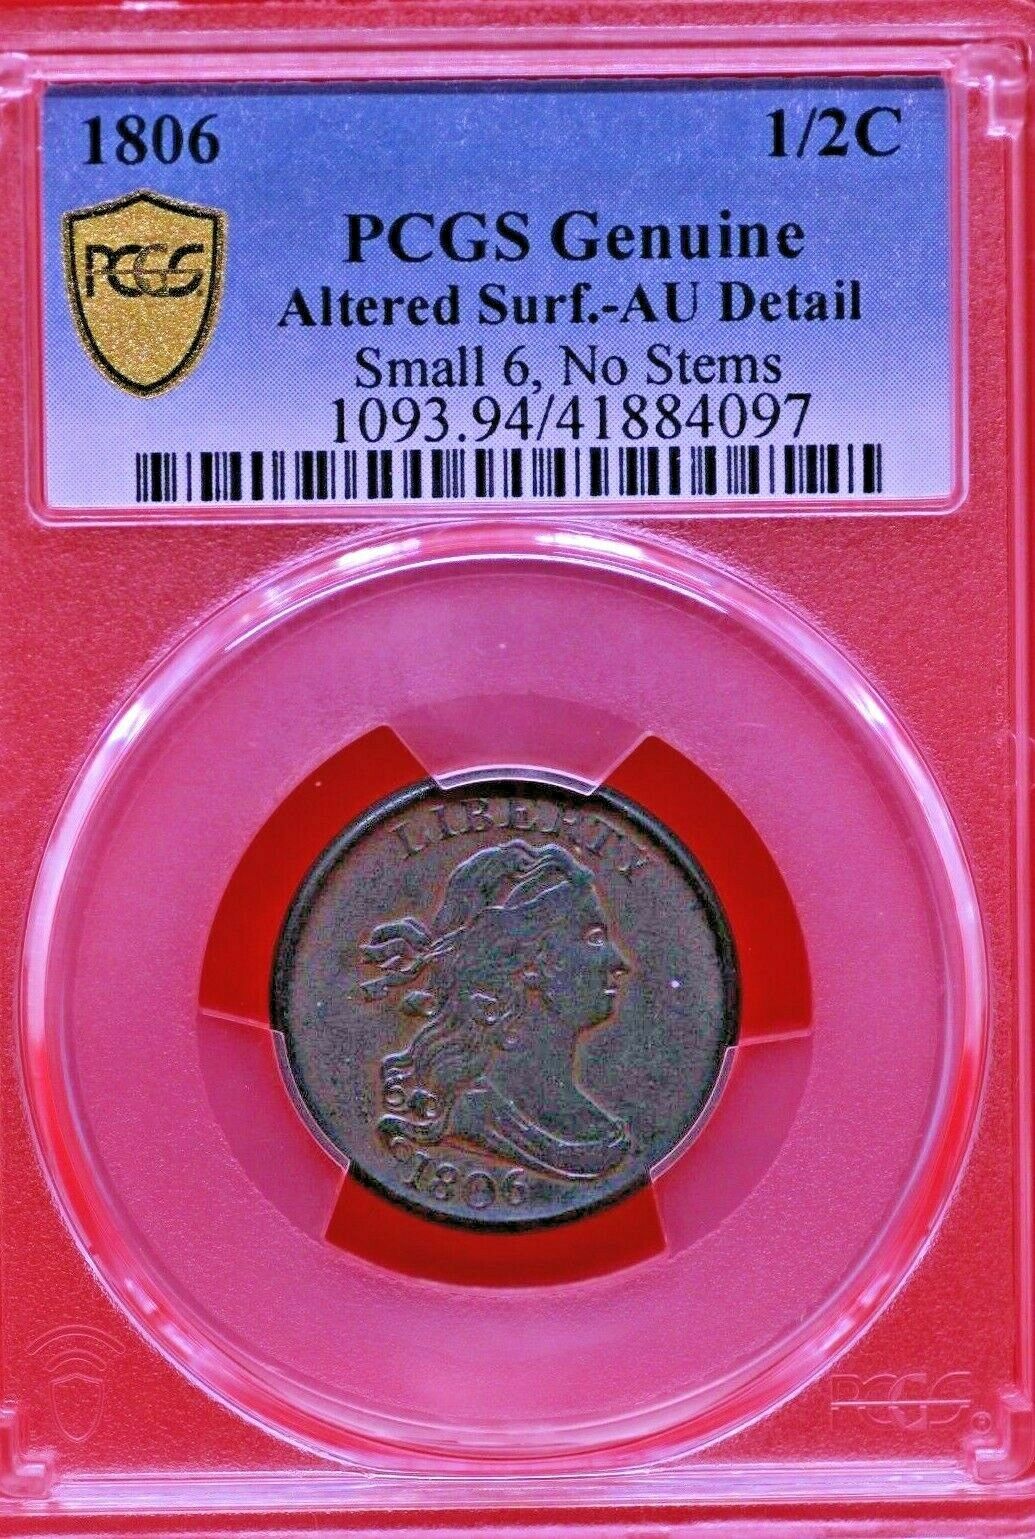 1806 PCGS Altered Surf. AU-Detail Small 6, Stems Draped Bust Half Cent Coin 1/2c